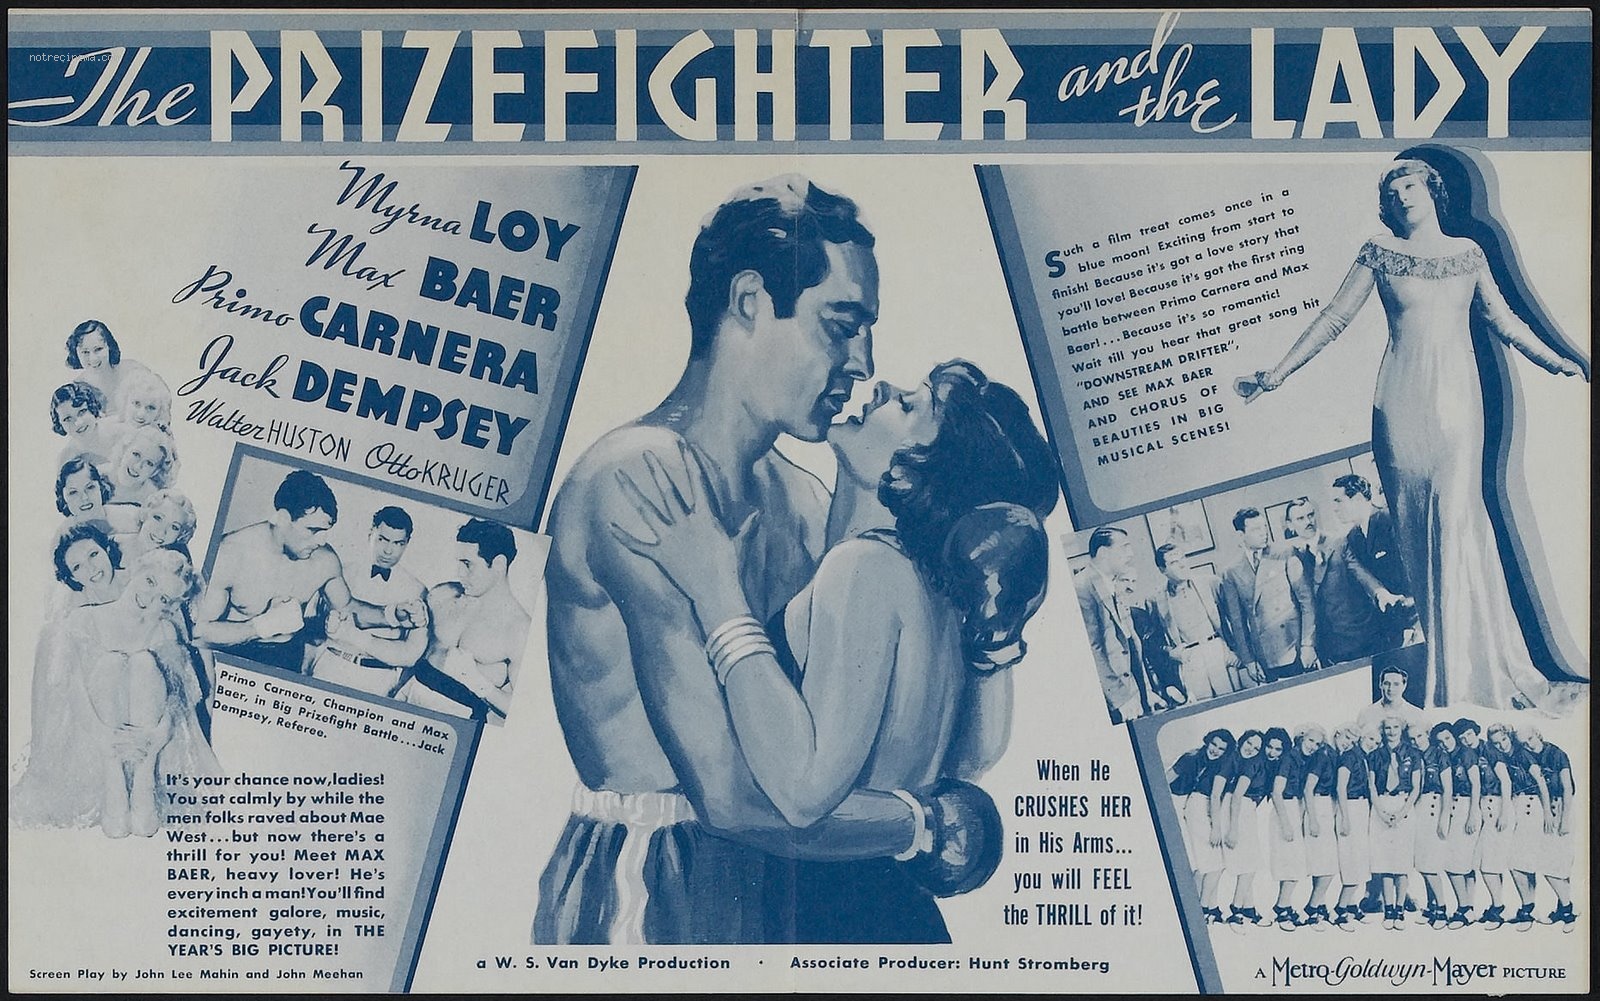 WebThe Prizefighter and the Lady Film Poster